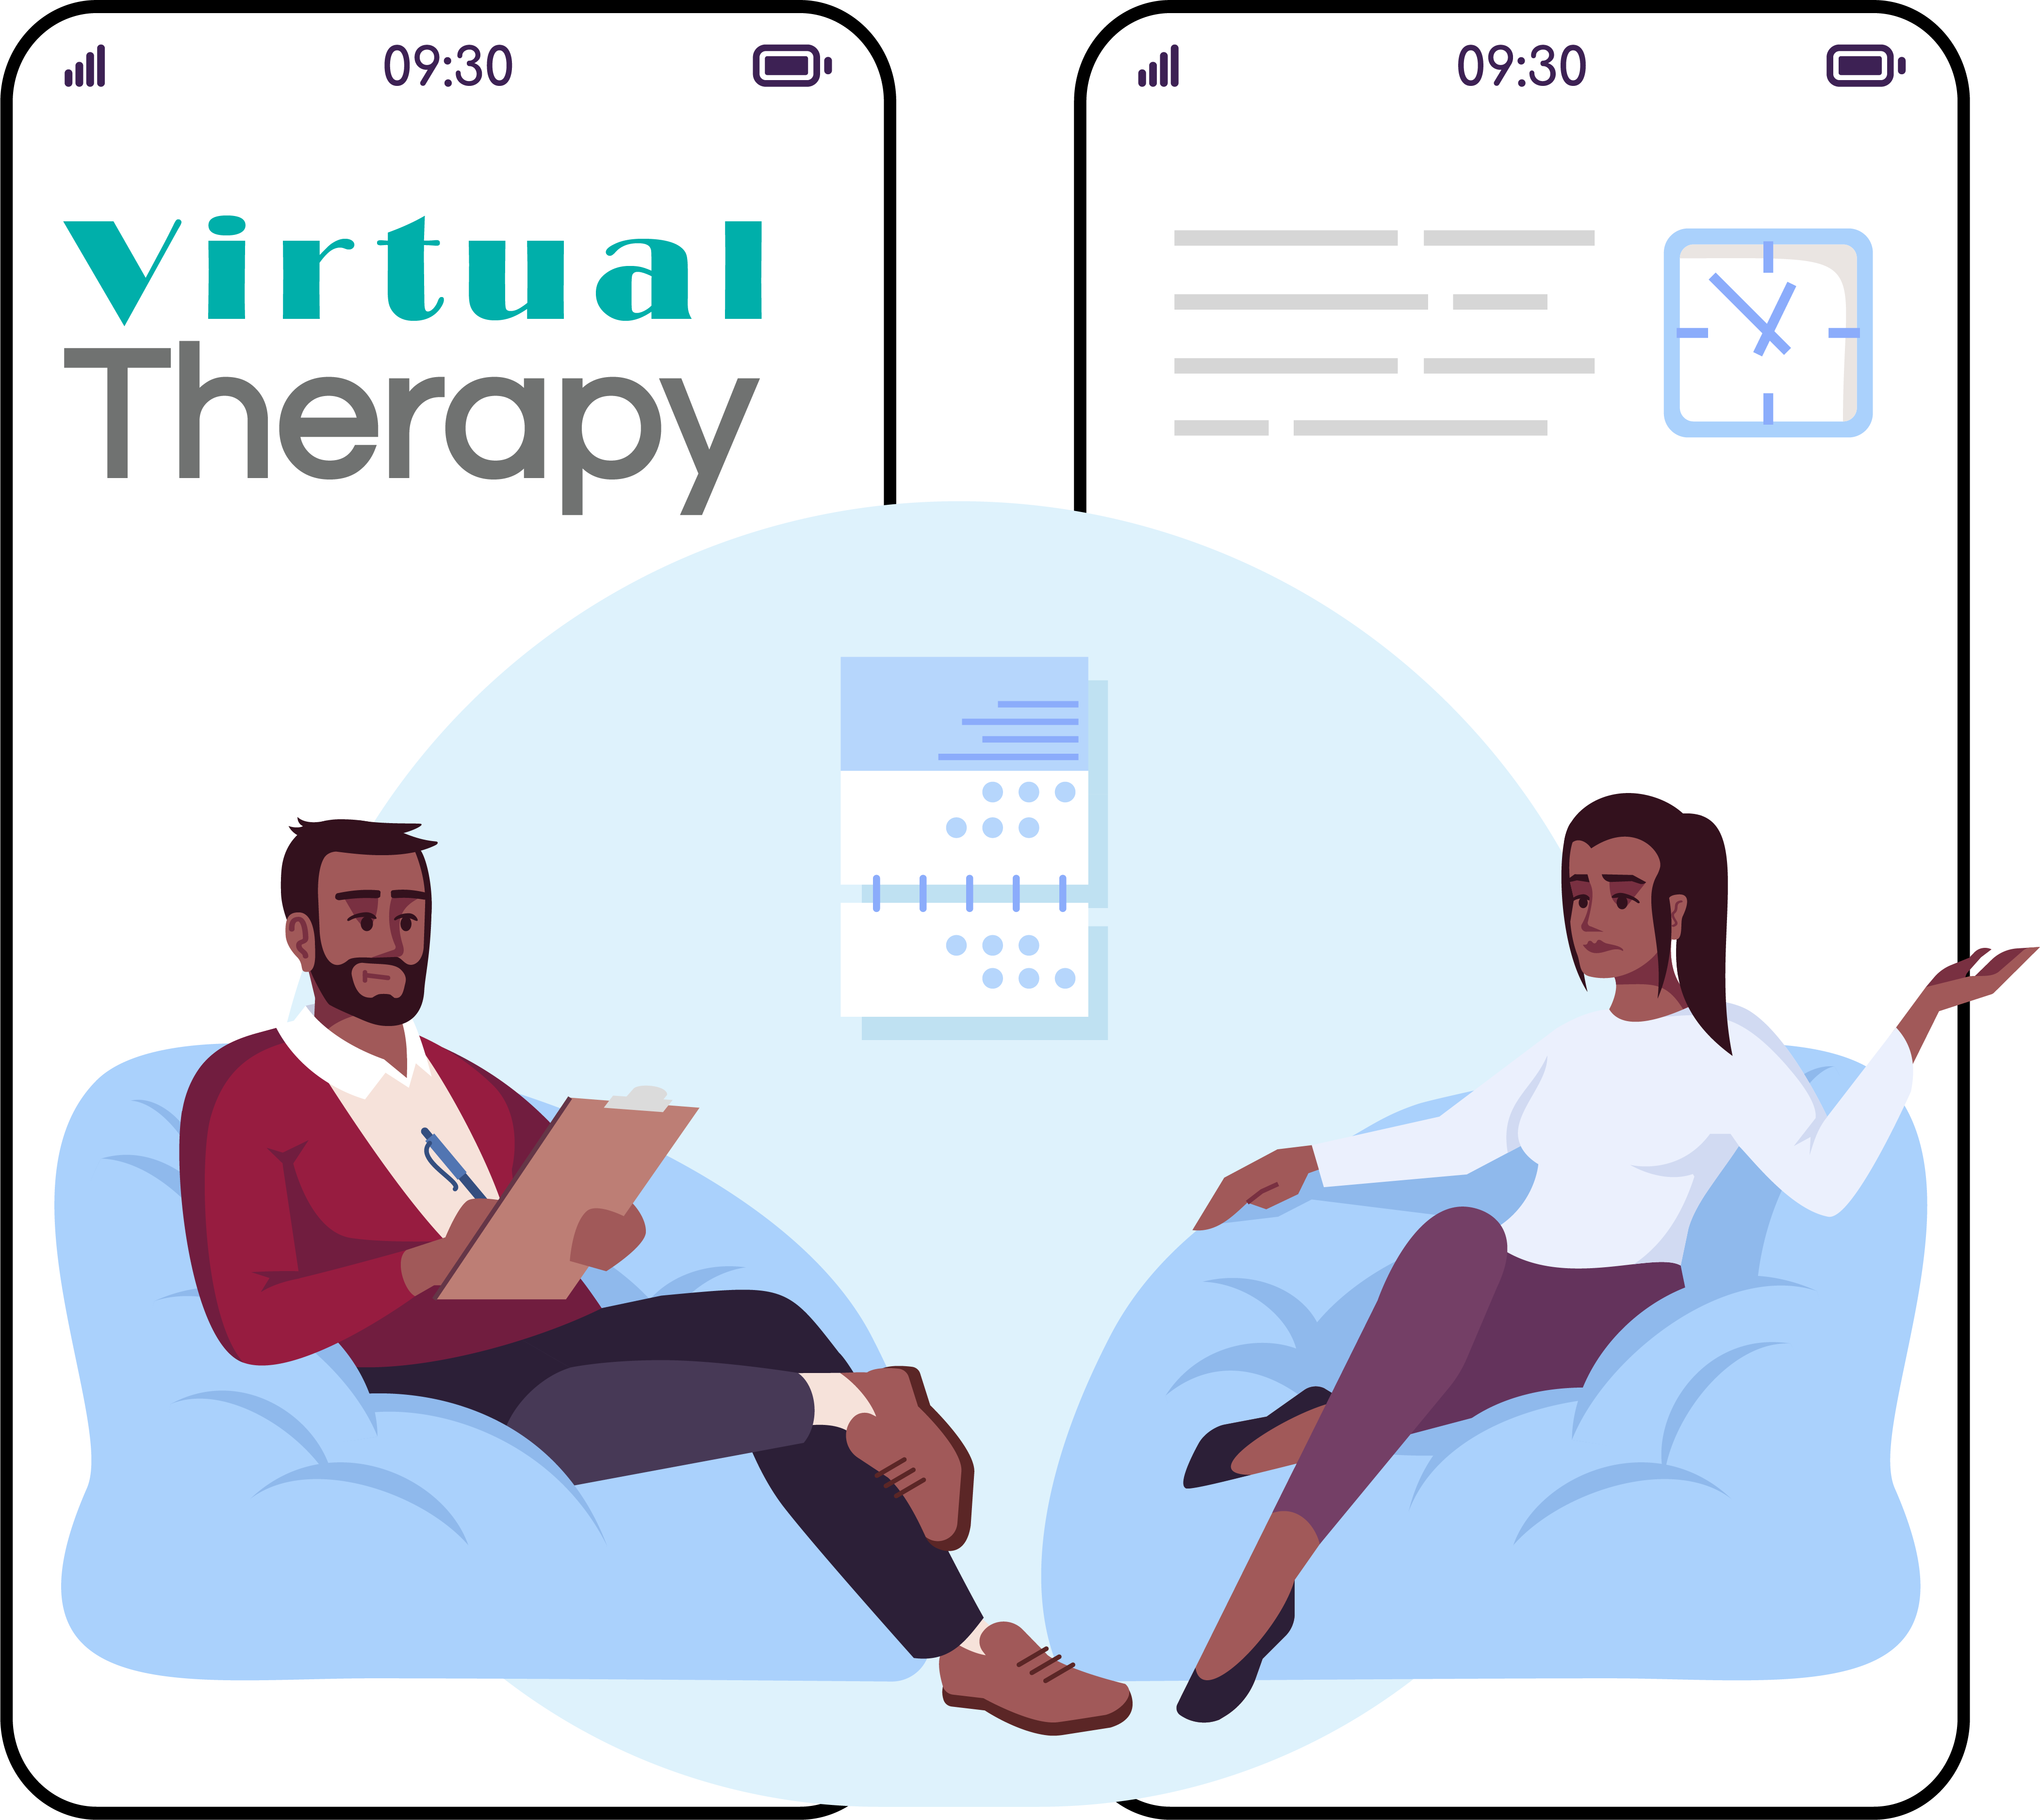 Virtual therapy graphic.